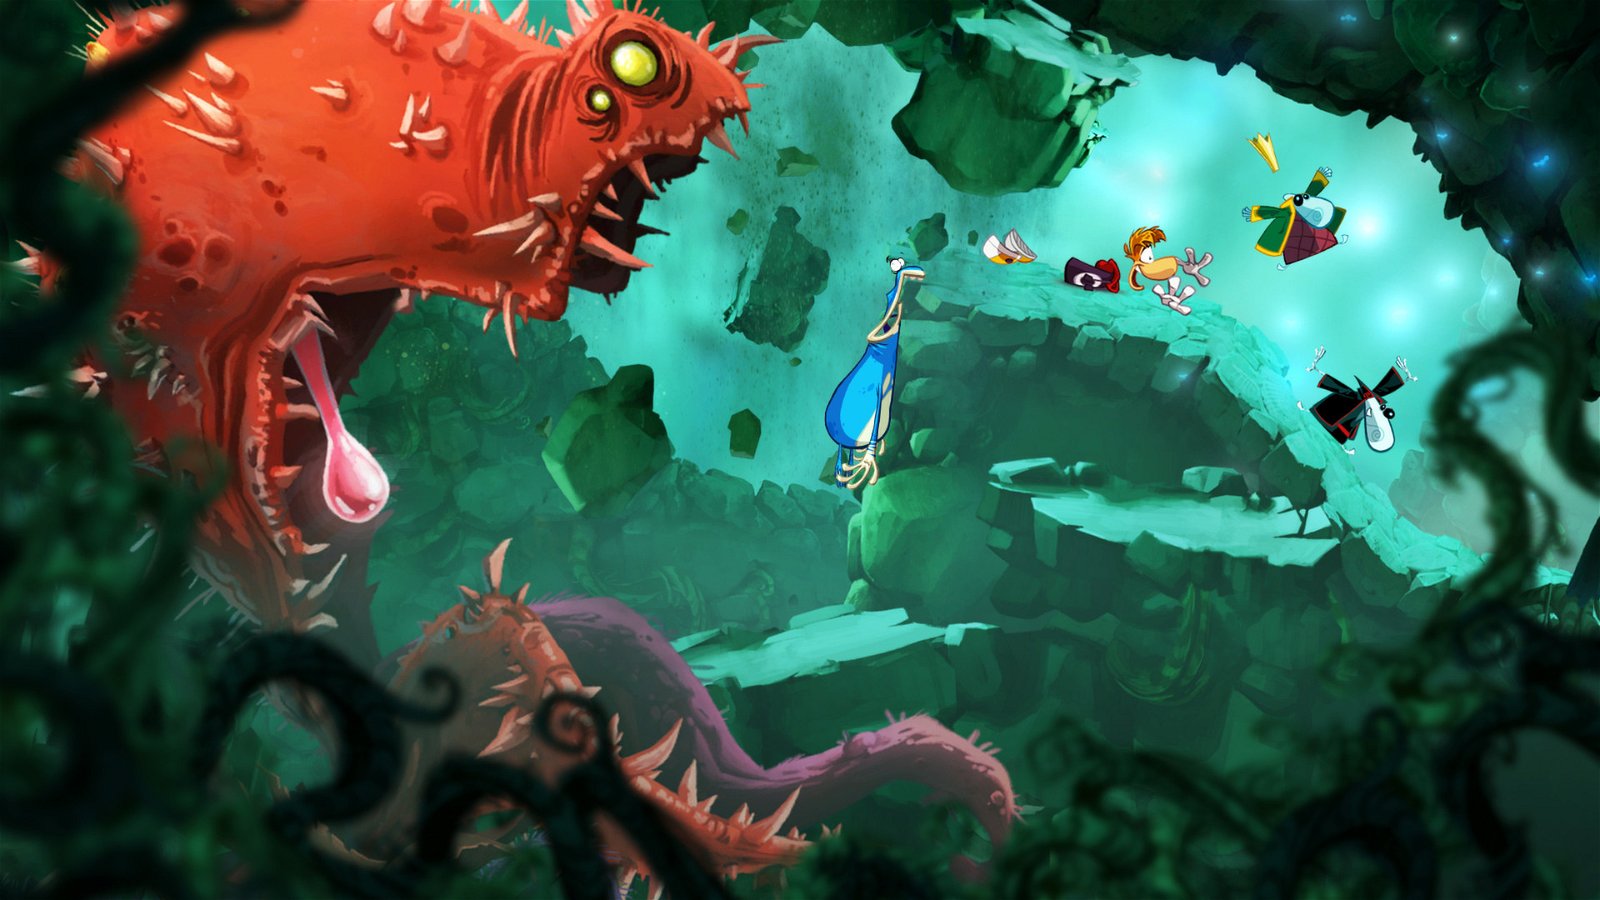 There is a splendid Rayman that now costs less than €3